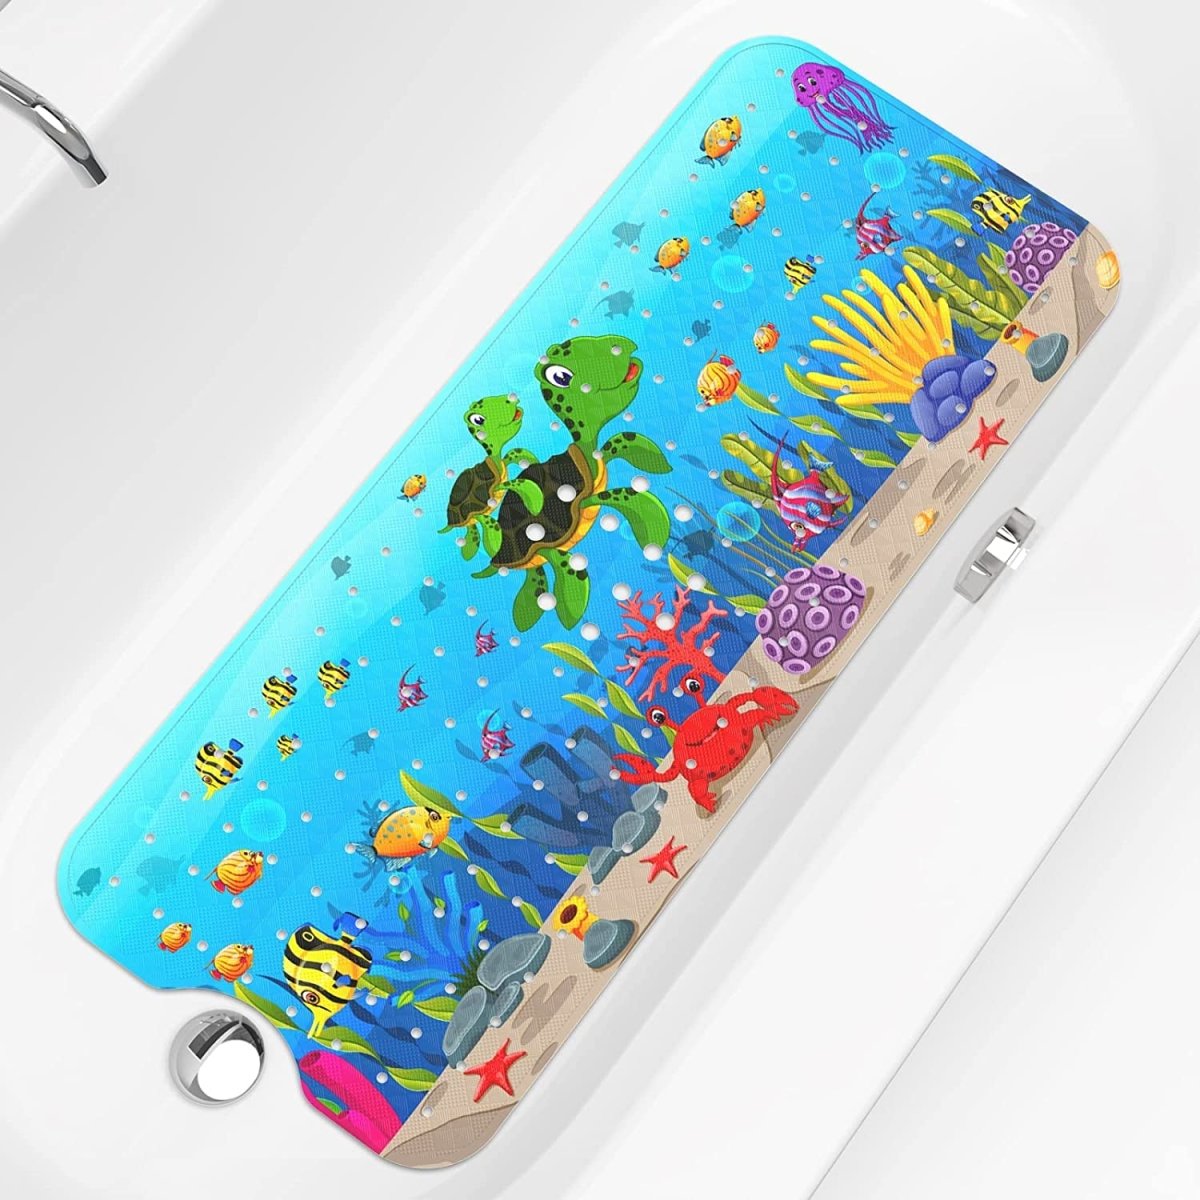 https://cdn.shopify.com/s/files/1/0619/6307/5793/products/baby-bath-mat-non-slip-anti-mould-100x40cm-extra-long-with-suction-cups-and-drain-holes-b09y52q77r-862317.jpg?v=1683321128&width=1200